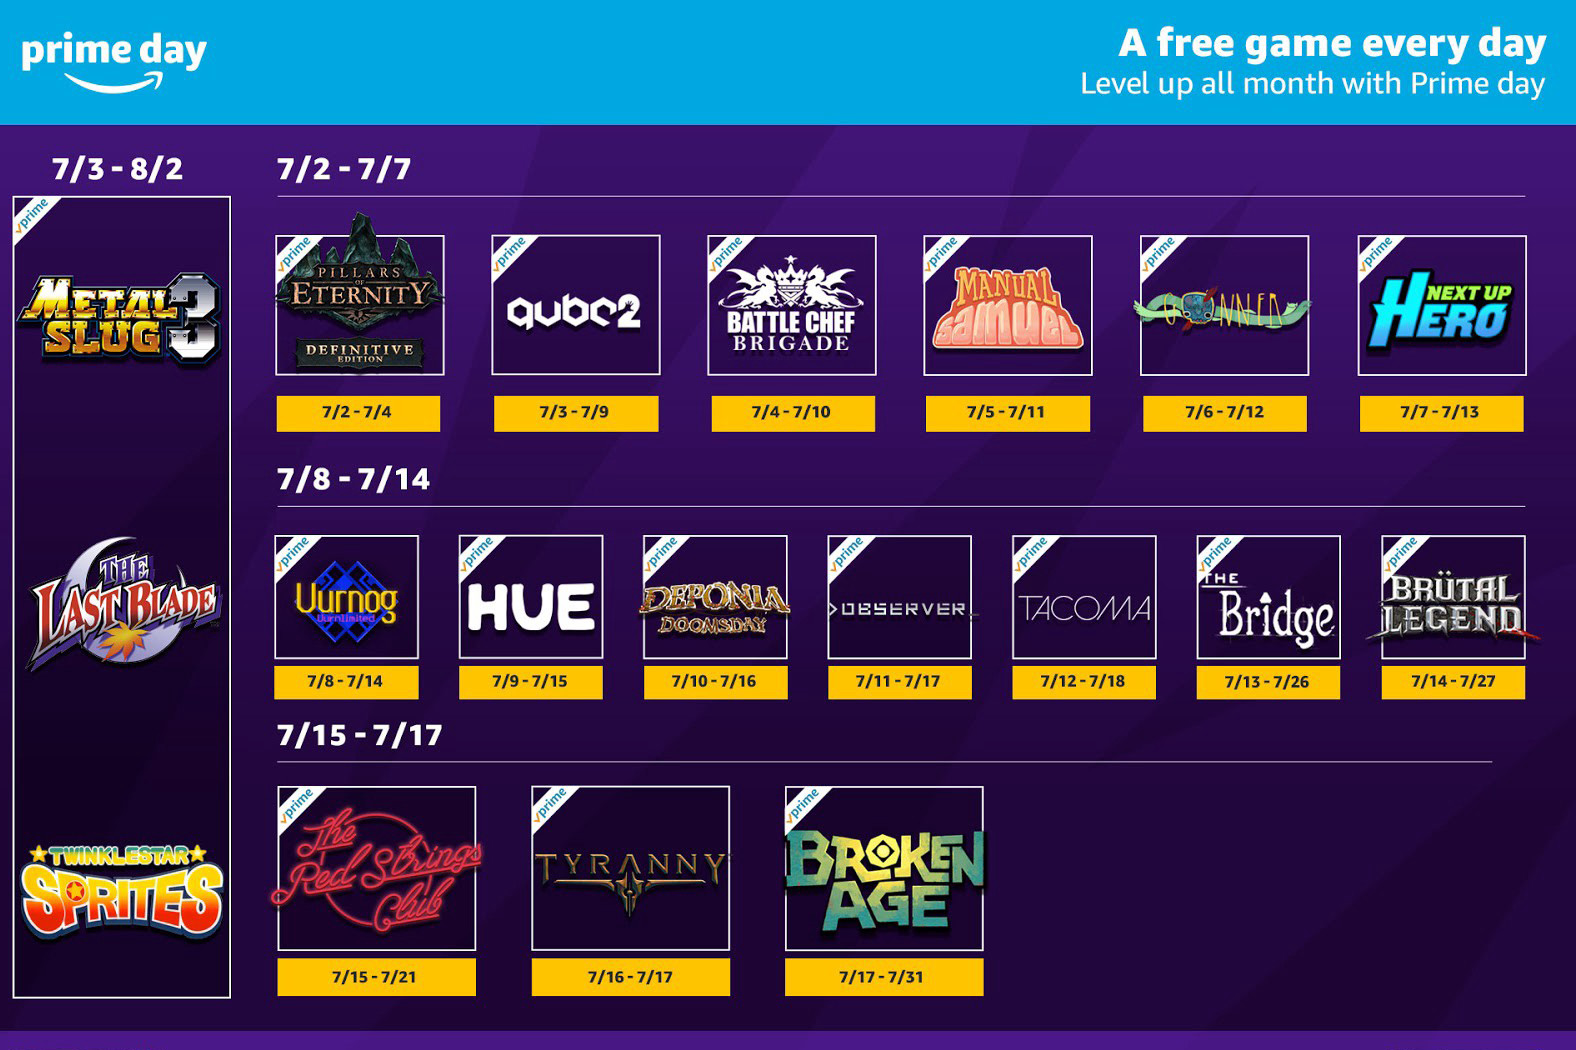 Free video games from Prime Gaming and Twitch for March